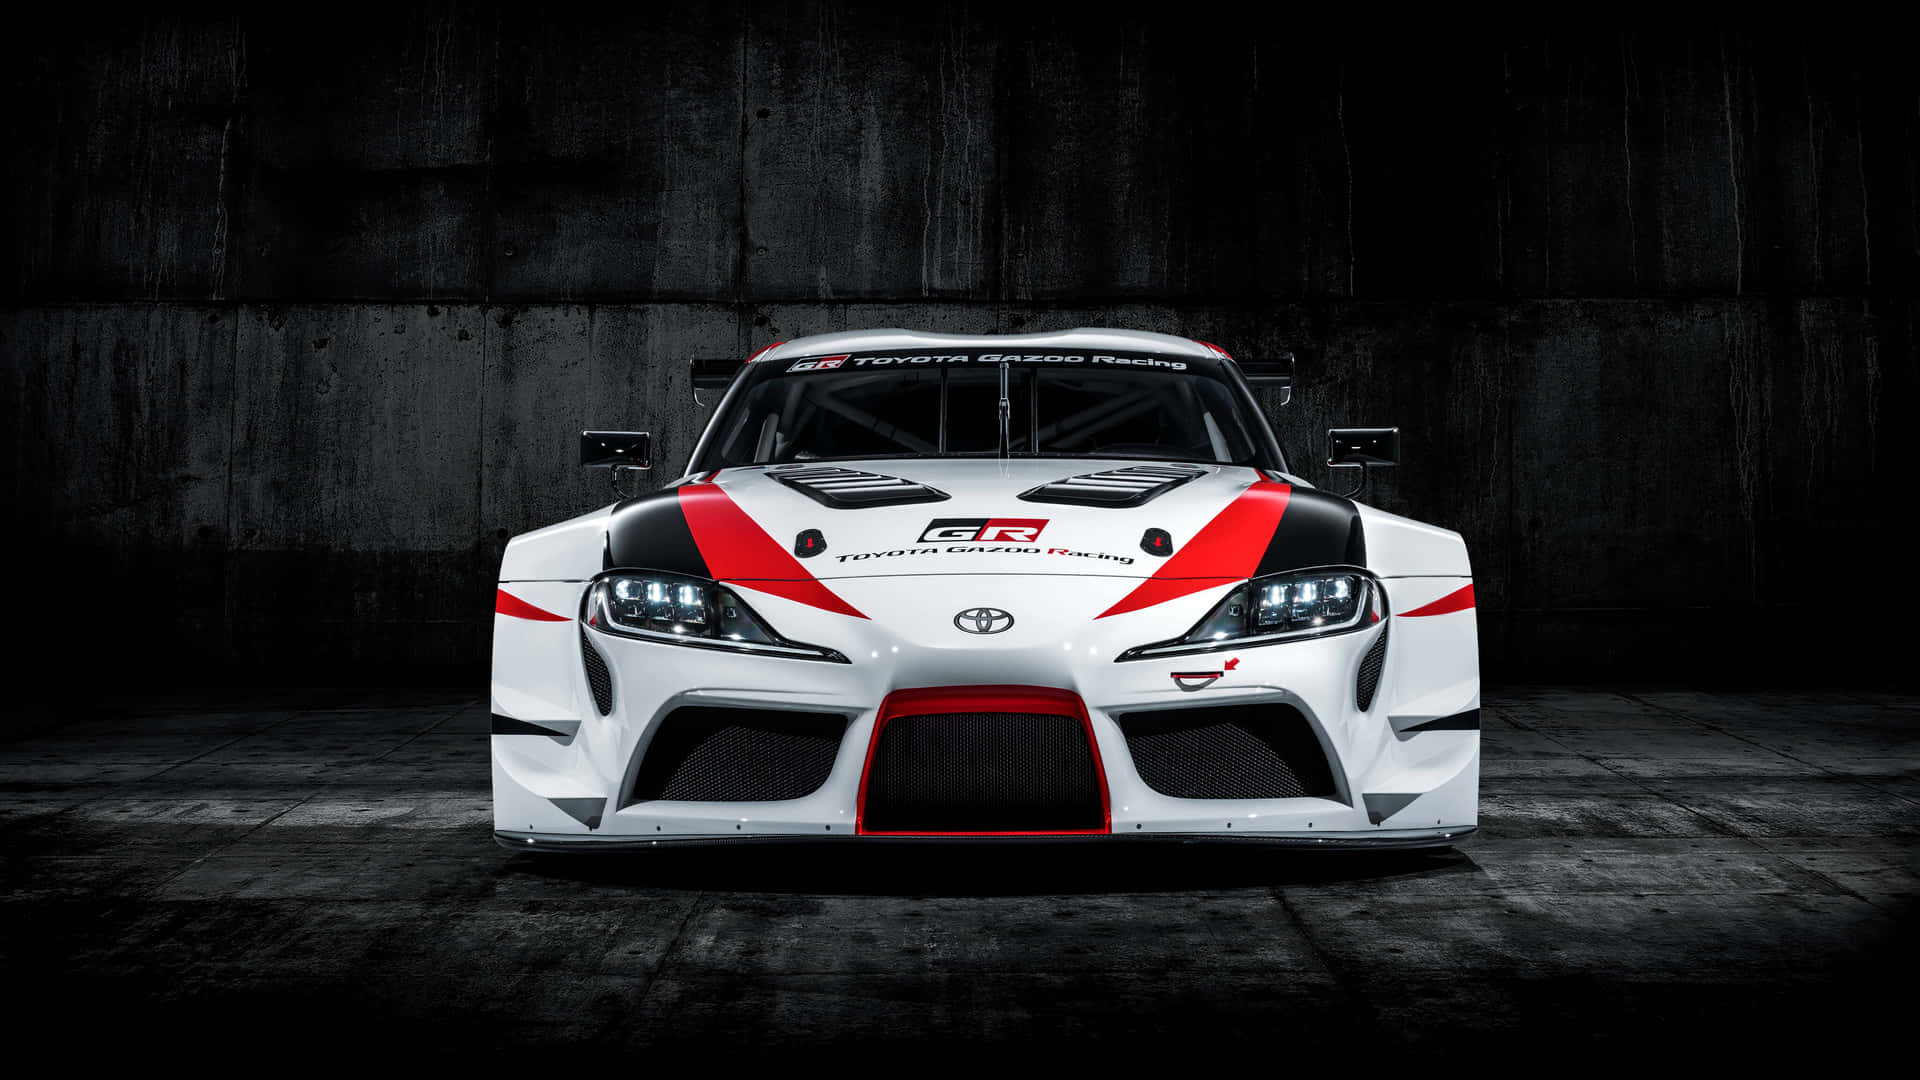 Legendary reliability and performance combined in the Toyota